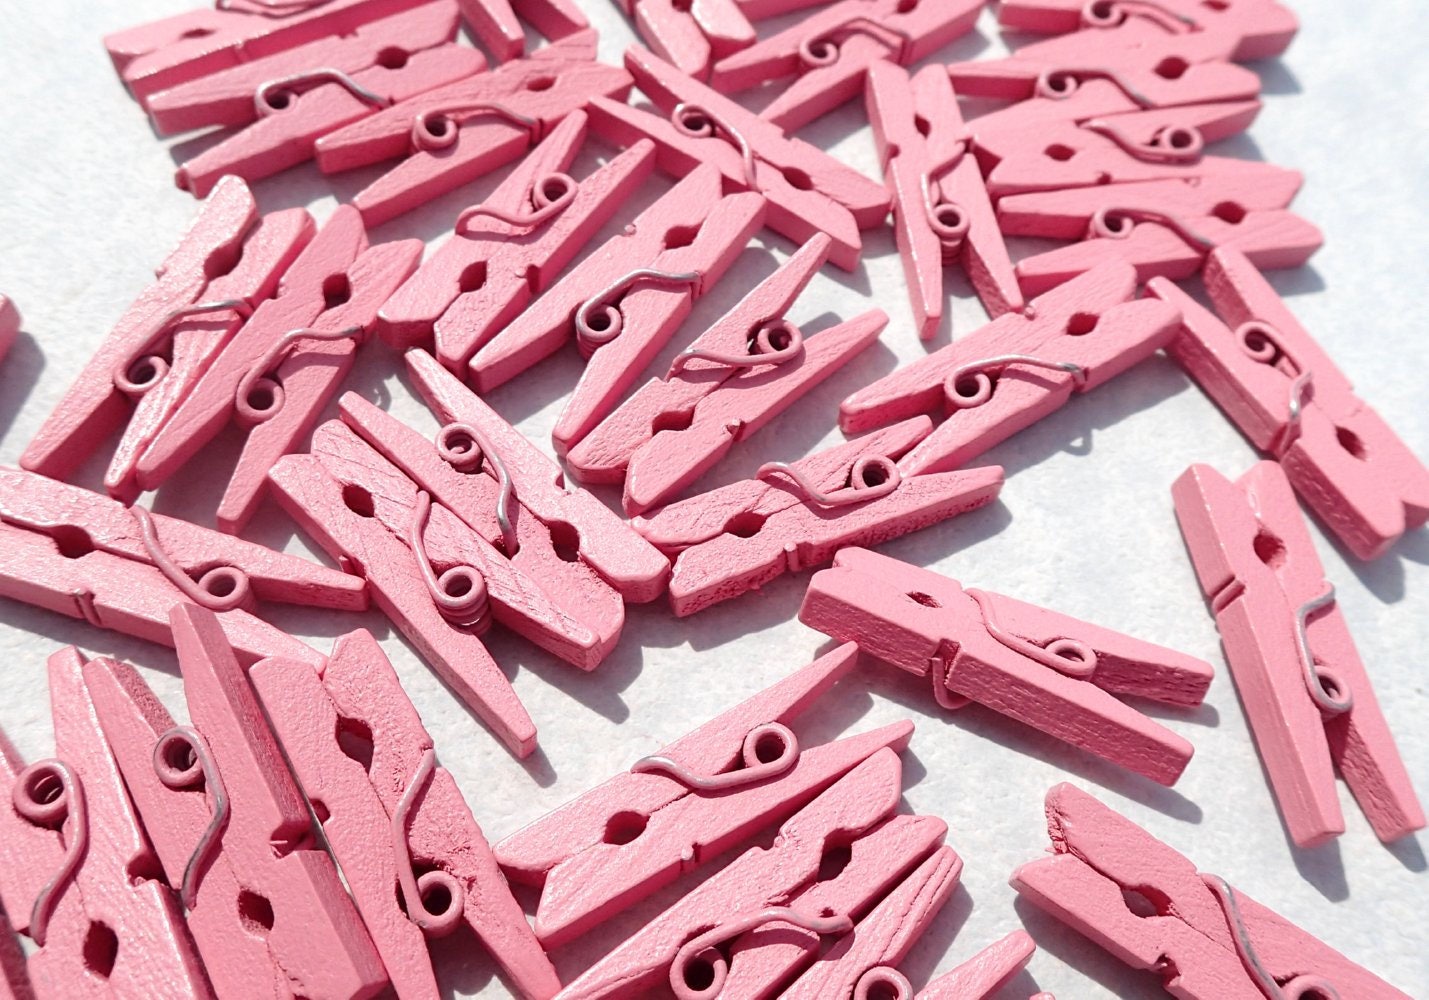 Mini Clothespins in Bright Pink - 25 - 1 - 2.5 cm - Wooden - Great for